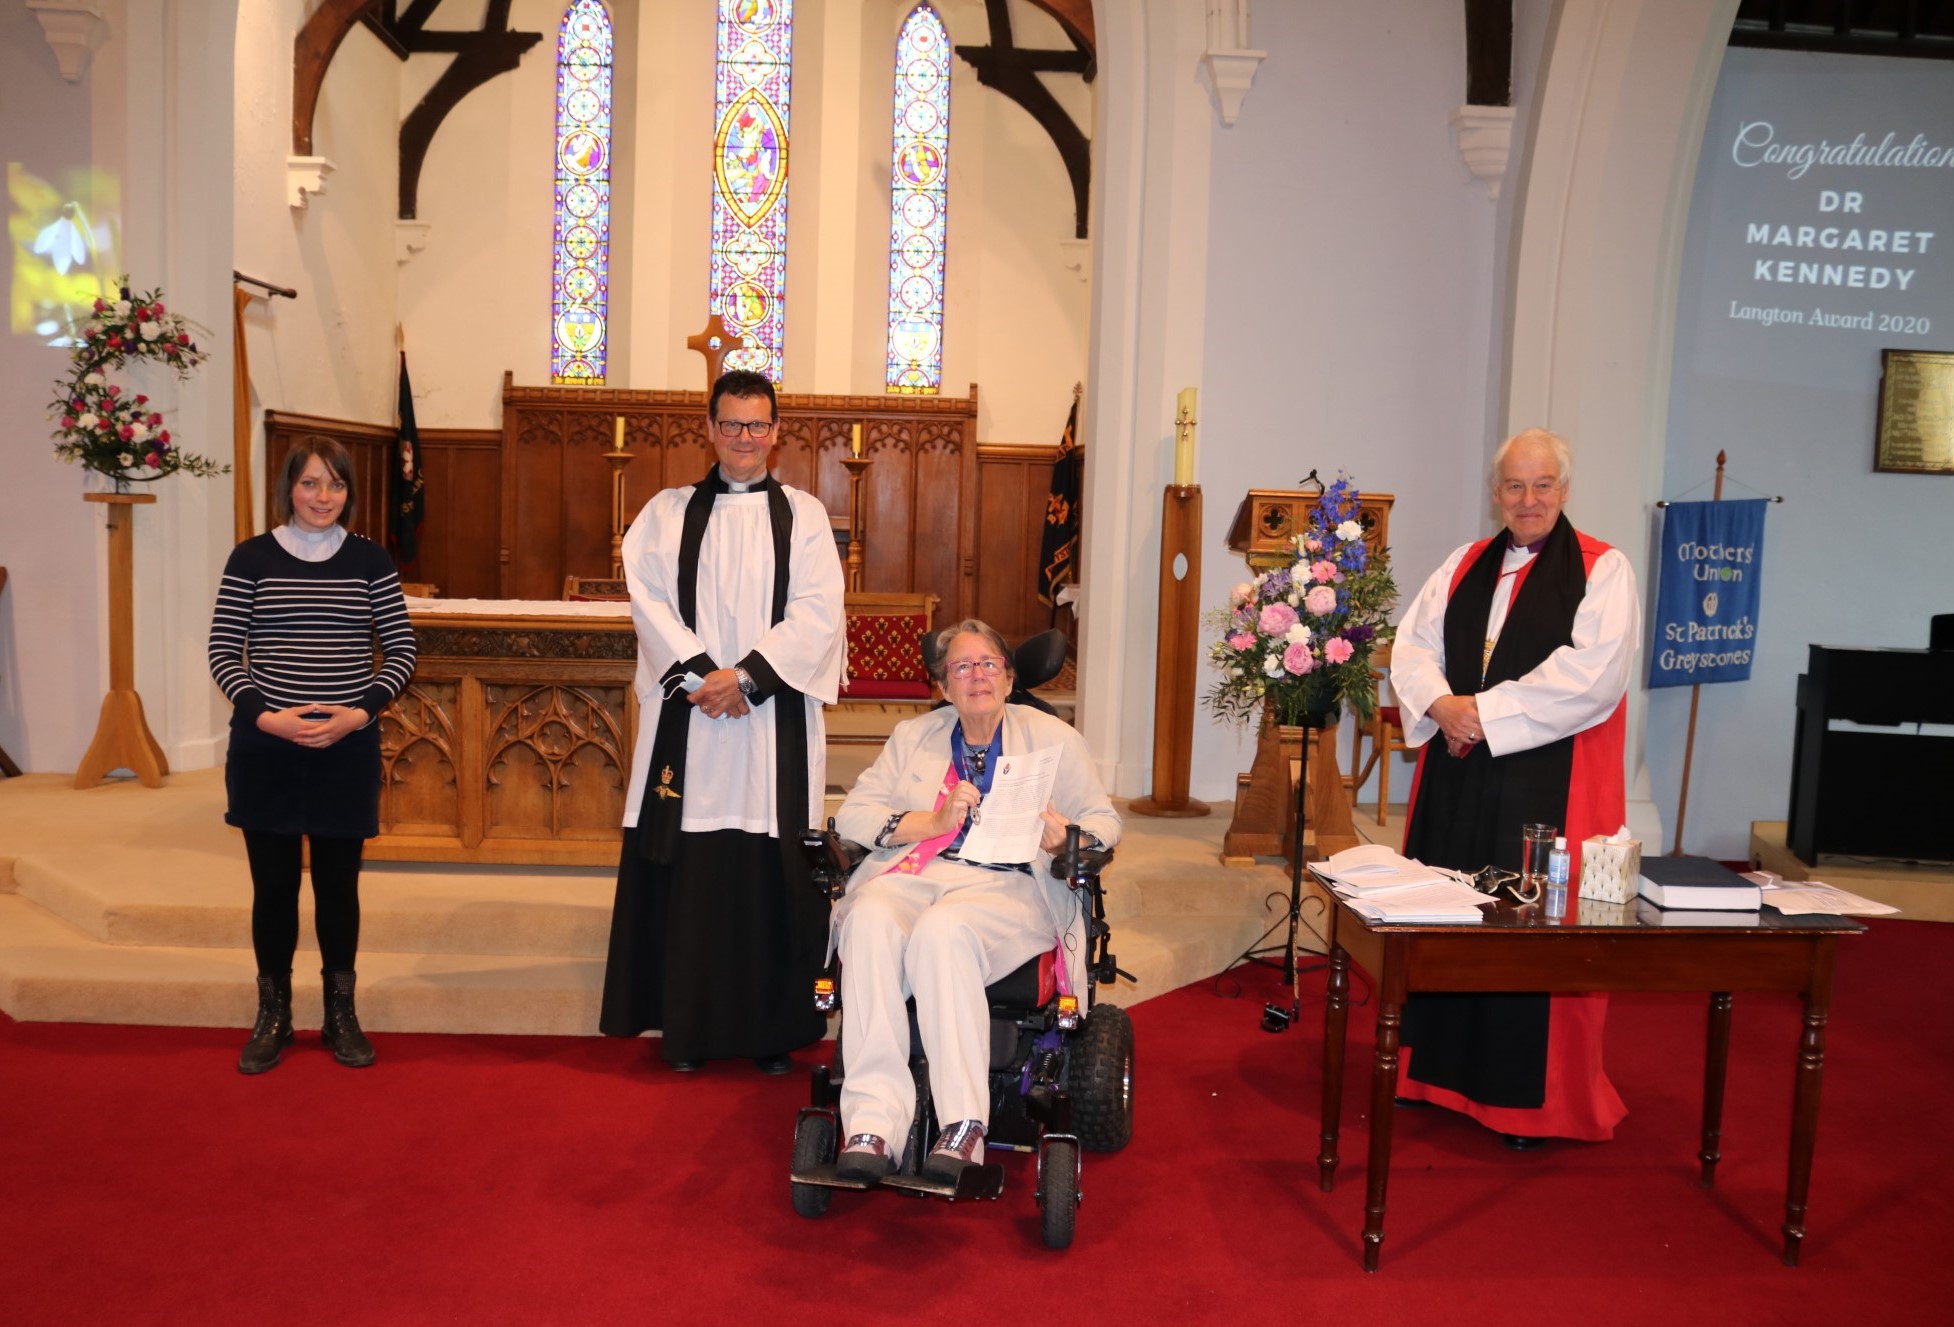 From left: the Revd Rebecca Guildea; the Revd David Mungavin, Rector of Greystones; Dr Margaret Kennedy; and Archbishop Michael Jackson.